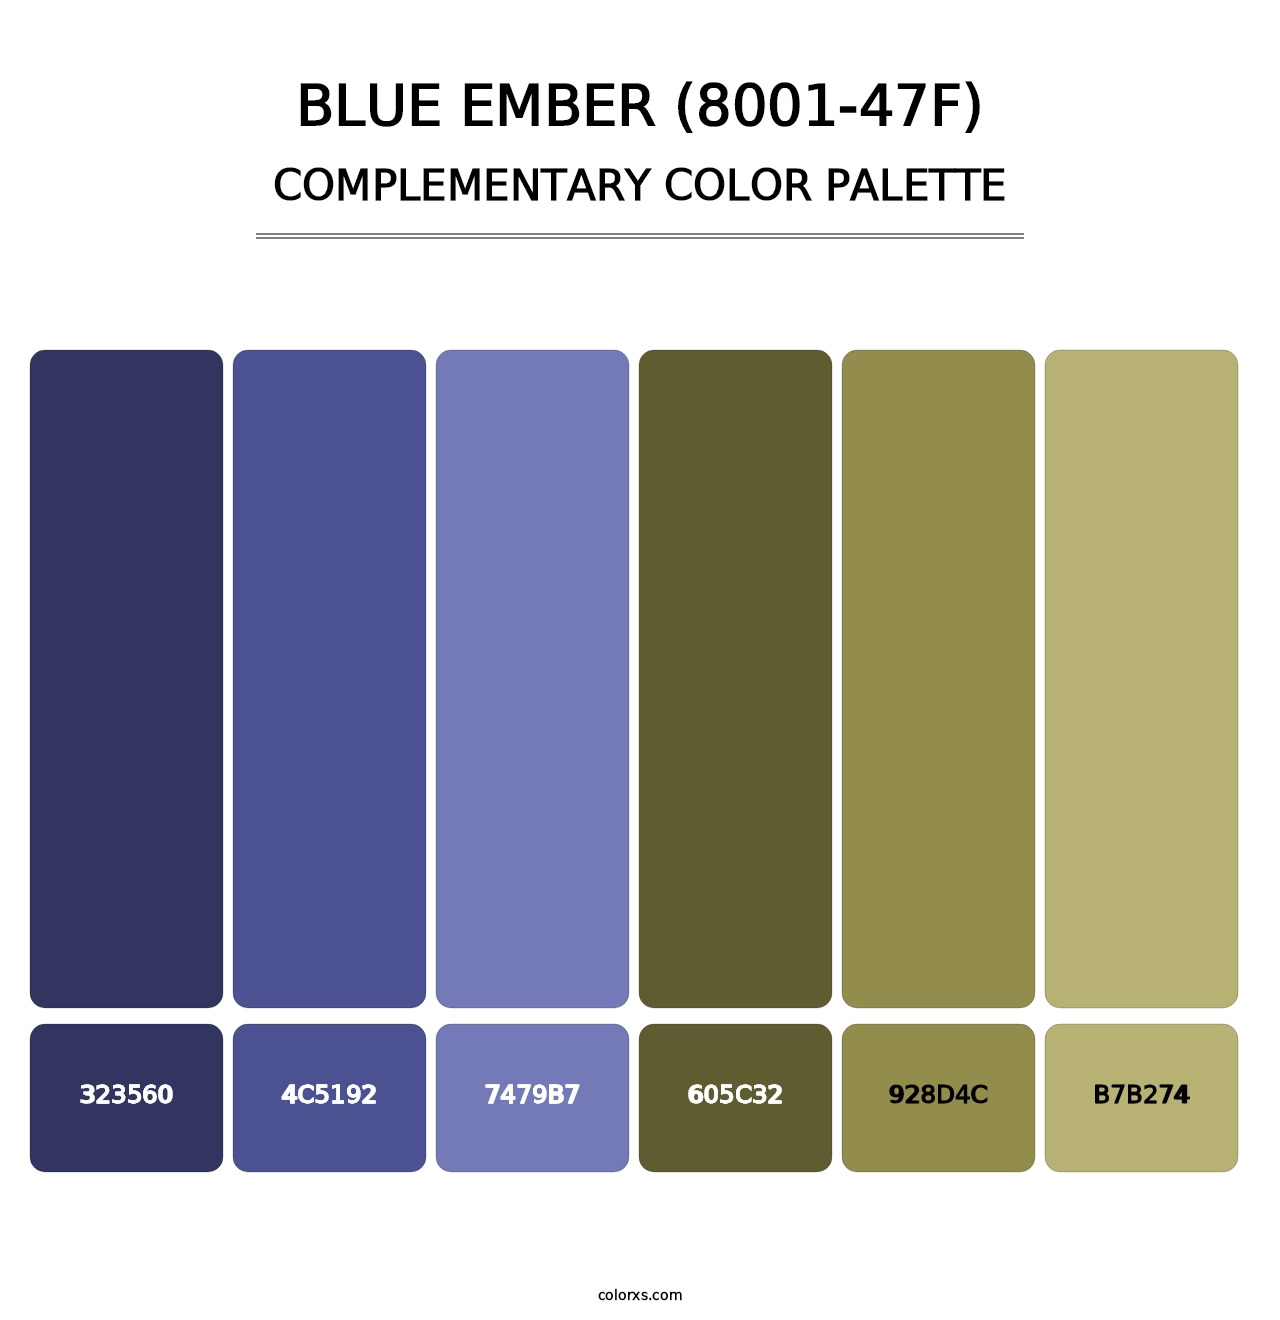 Blue Ember (8001-47F) - Complementary Color Palette